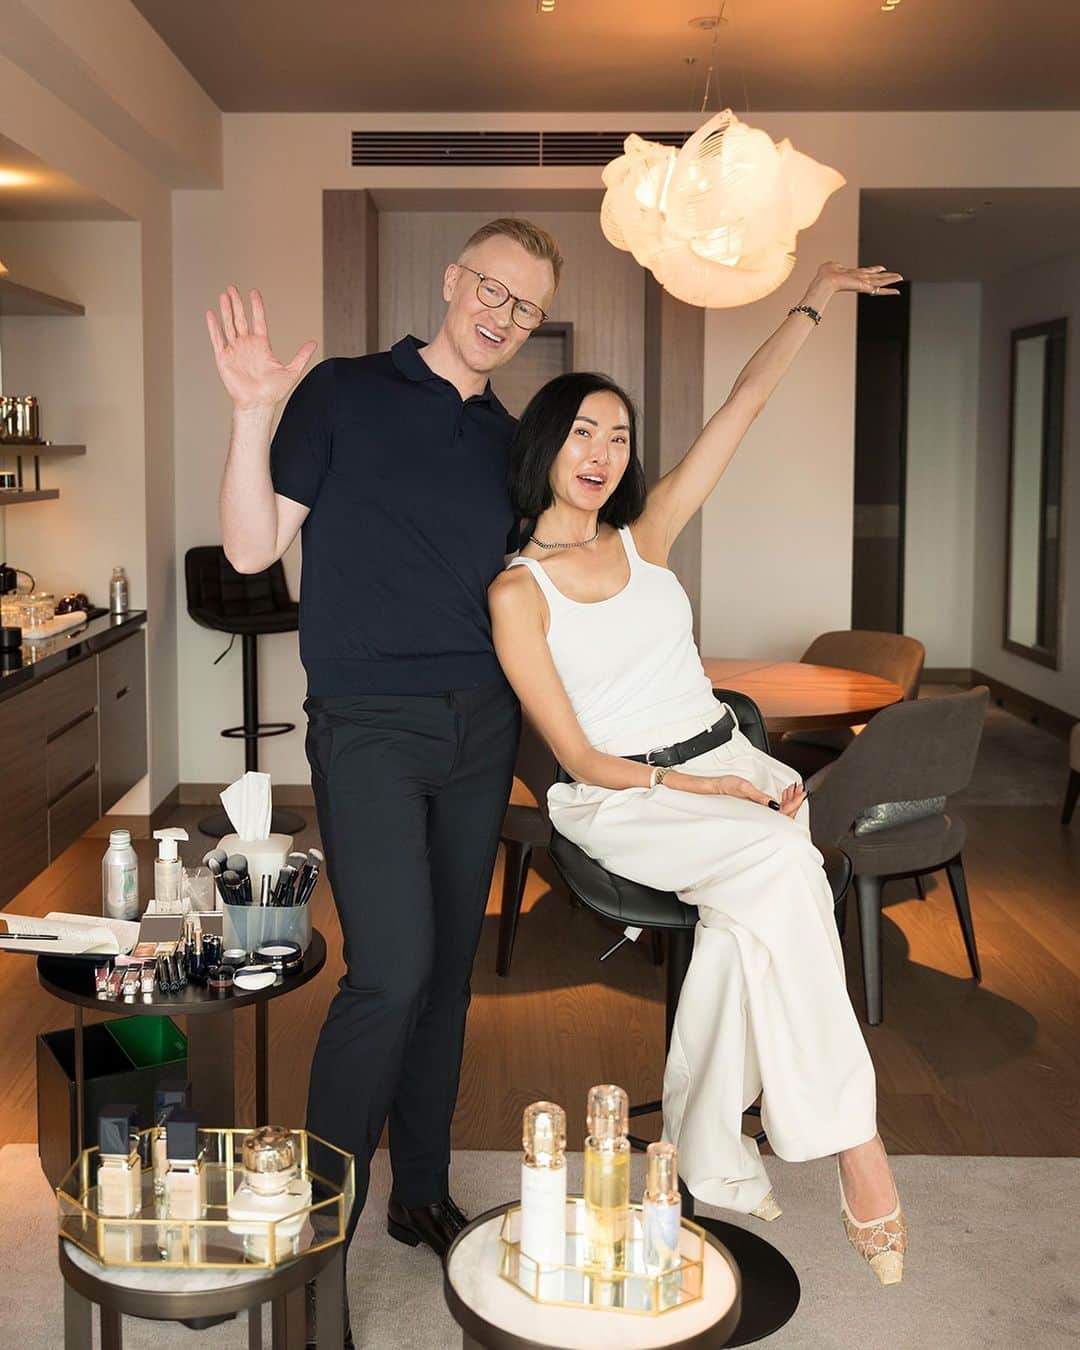 Clé de Peau Beauté Officialのインスタグラム：「In case you missed it: here are some behind-the-scenes shots of our Global Color Director @BenjaminPuckey getting our radiant #CPBCollective member @ChriselleLim ready for #TheScienceOfSkinIntelligence event in Tokyo.   Here are the products they used:  #TheFoundation in Shade O30 #TheConcealer #TranslucentLoosePowder  #CreamBlush in Shade 4 Perfect Peach #LuminizingFaceEnhancer in Shade 201 Twilight’s Glow #CreamRougeShine in Shade 204 Maraca Ginger  Which is your fave CPB product? Tell us in the comments!」